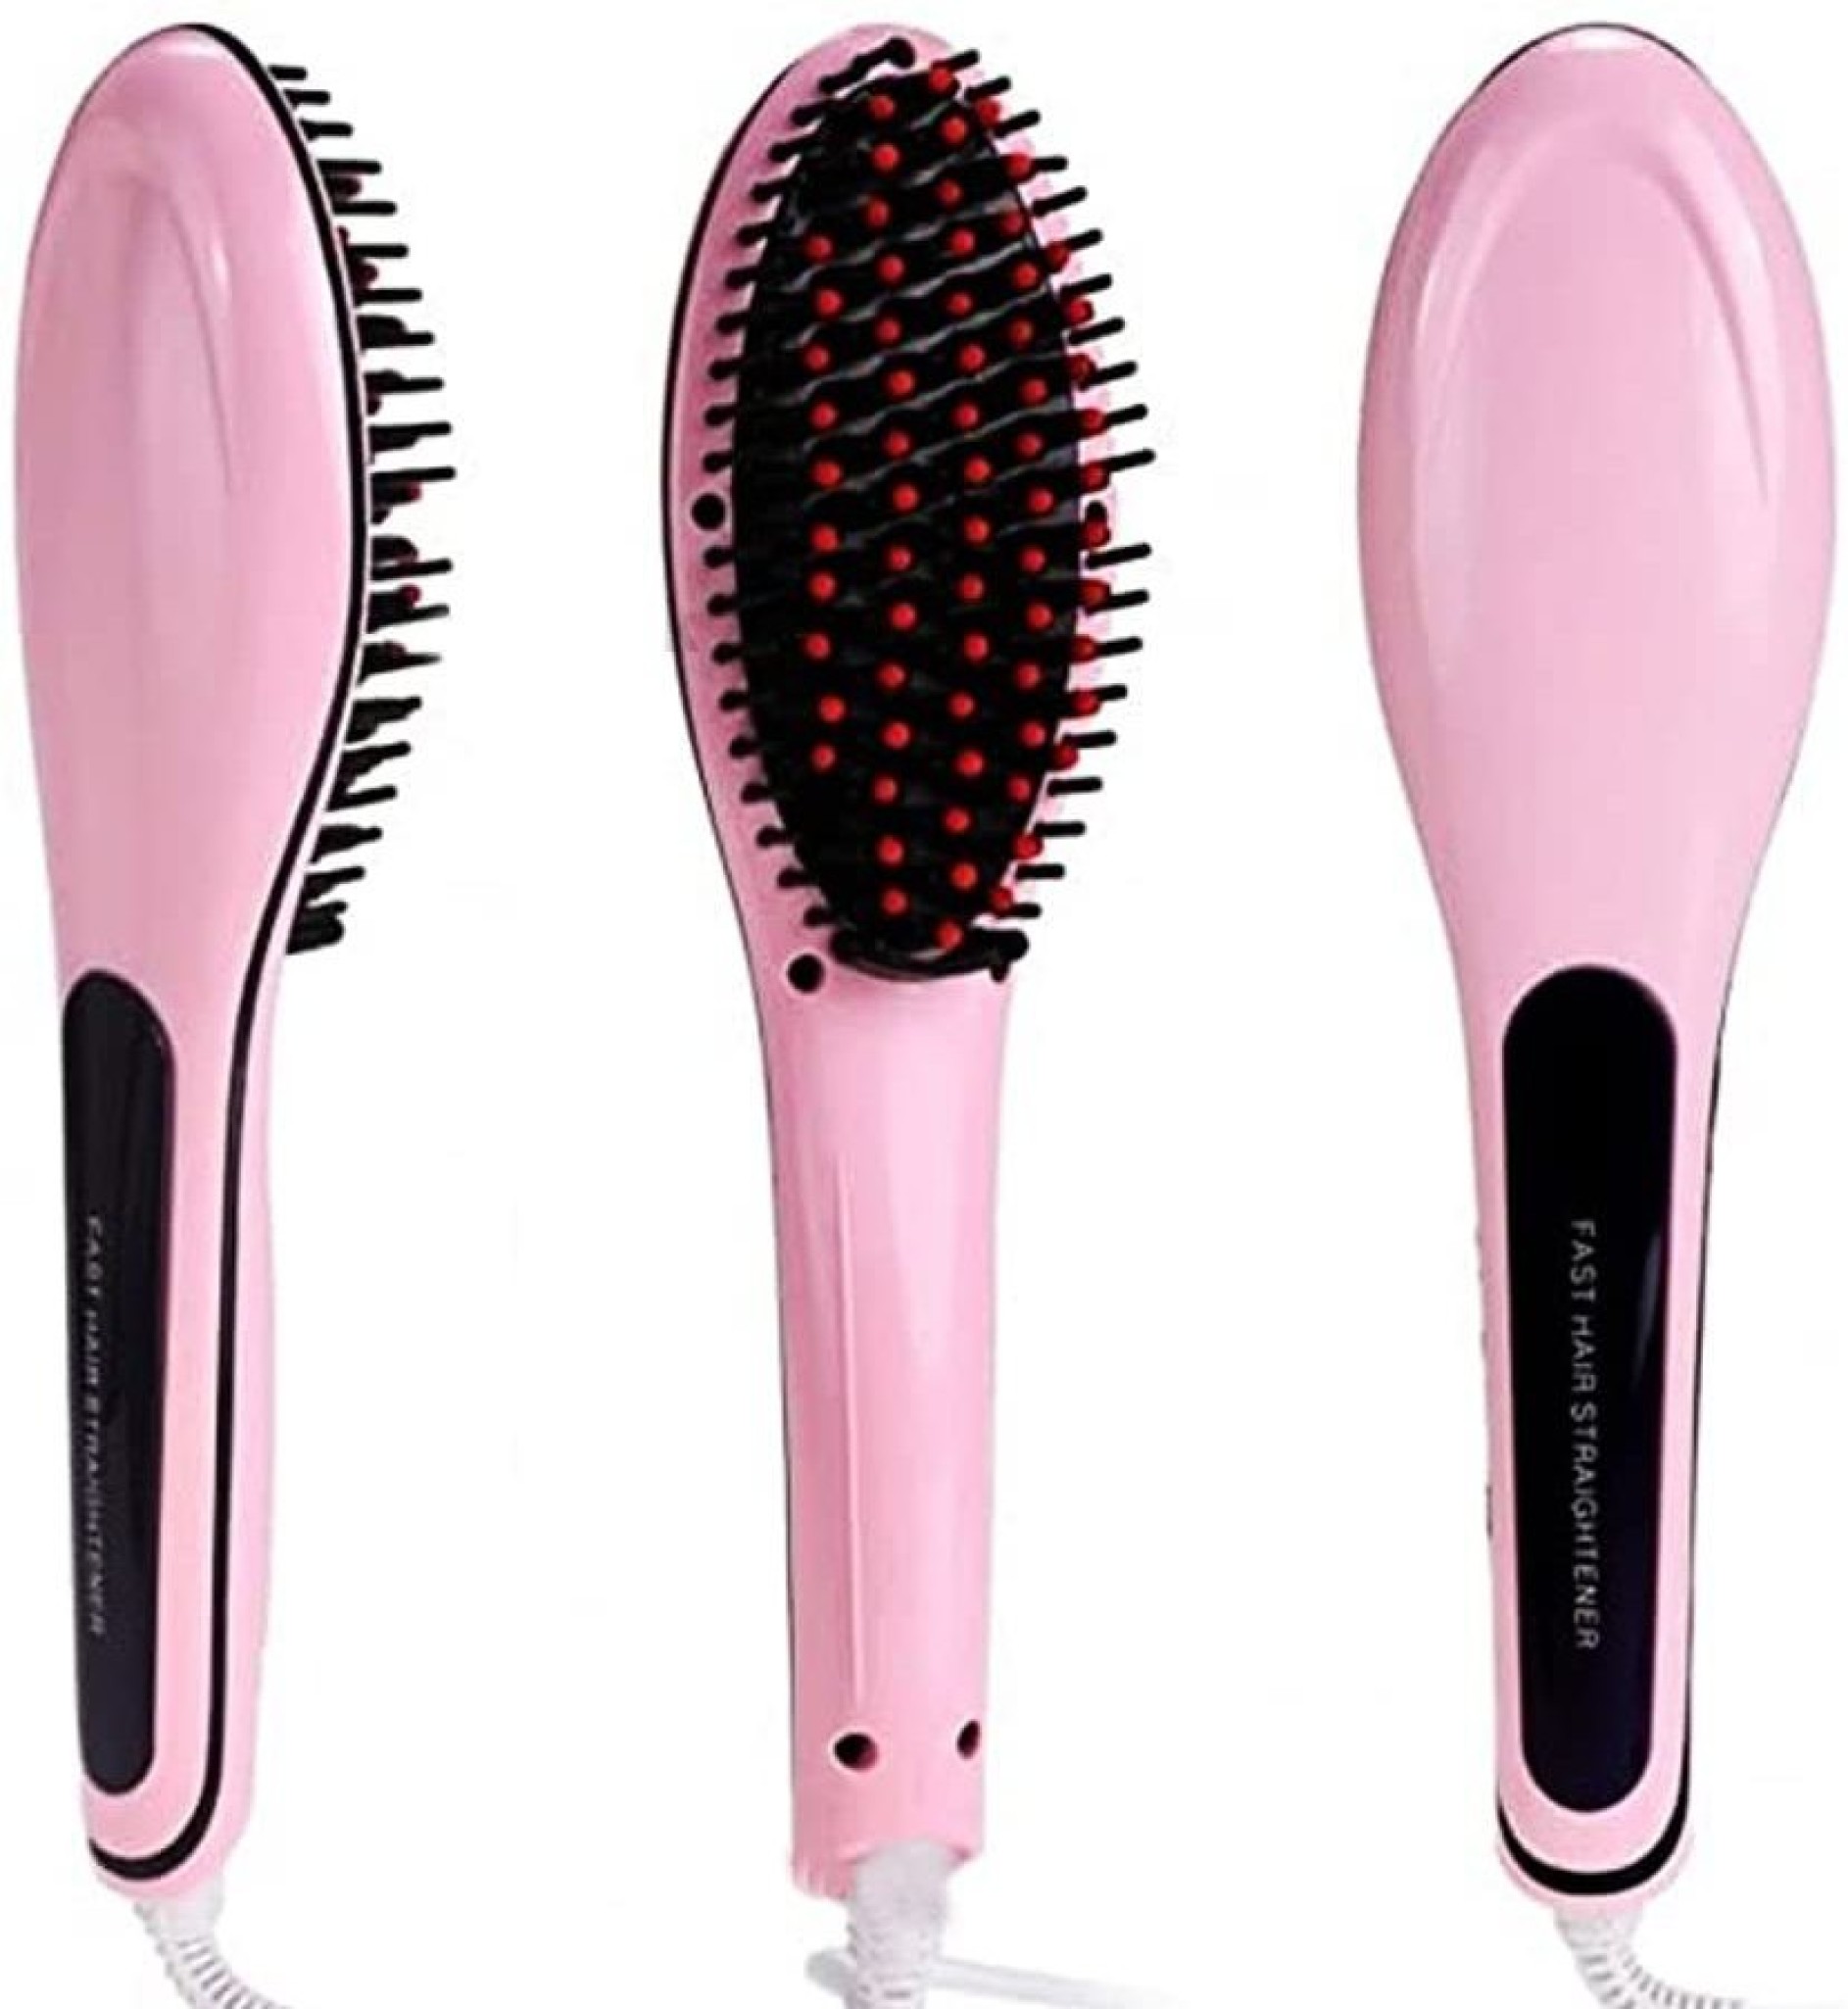 12 Best Hair Straightening Brushes of 2023 Tested by Experts